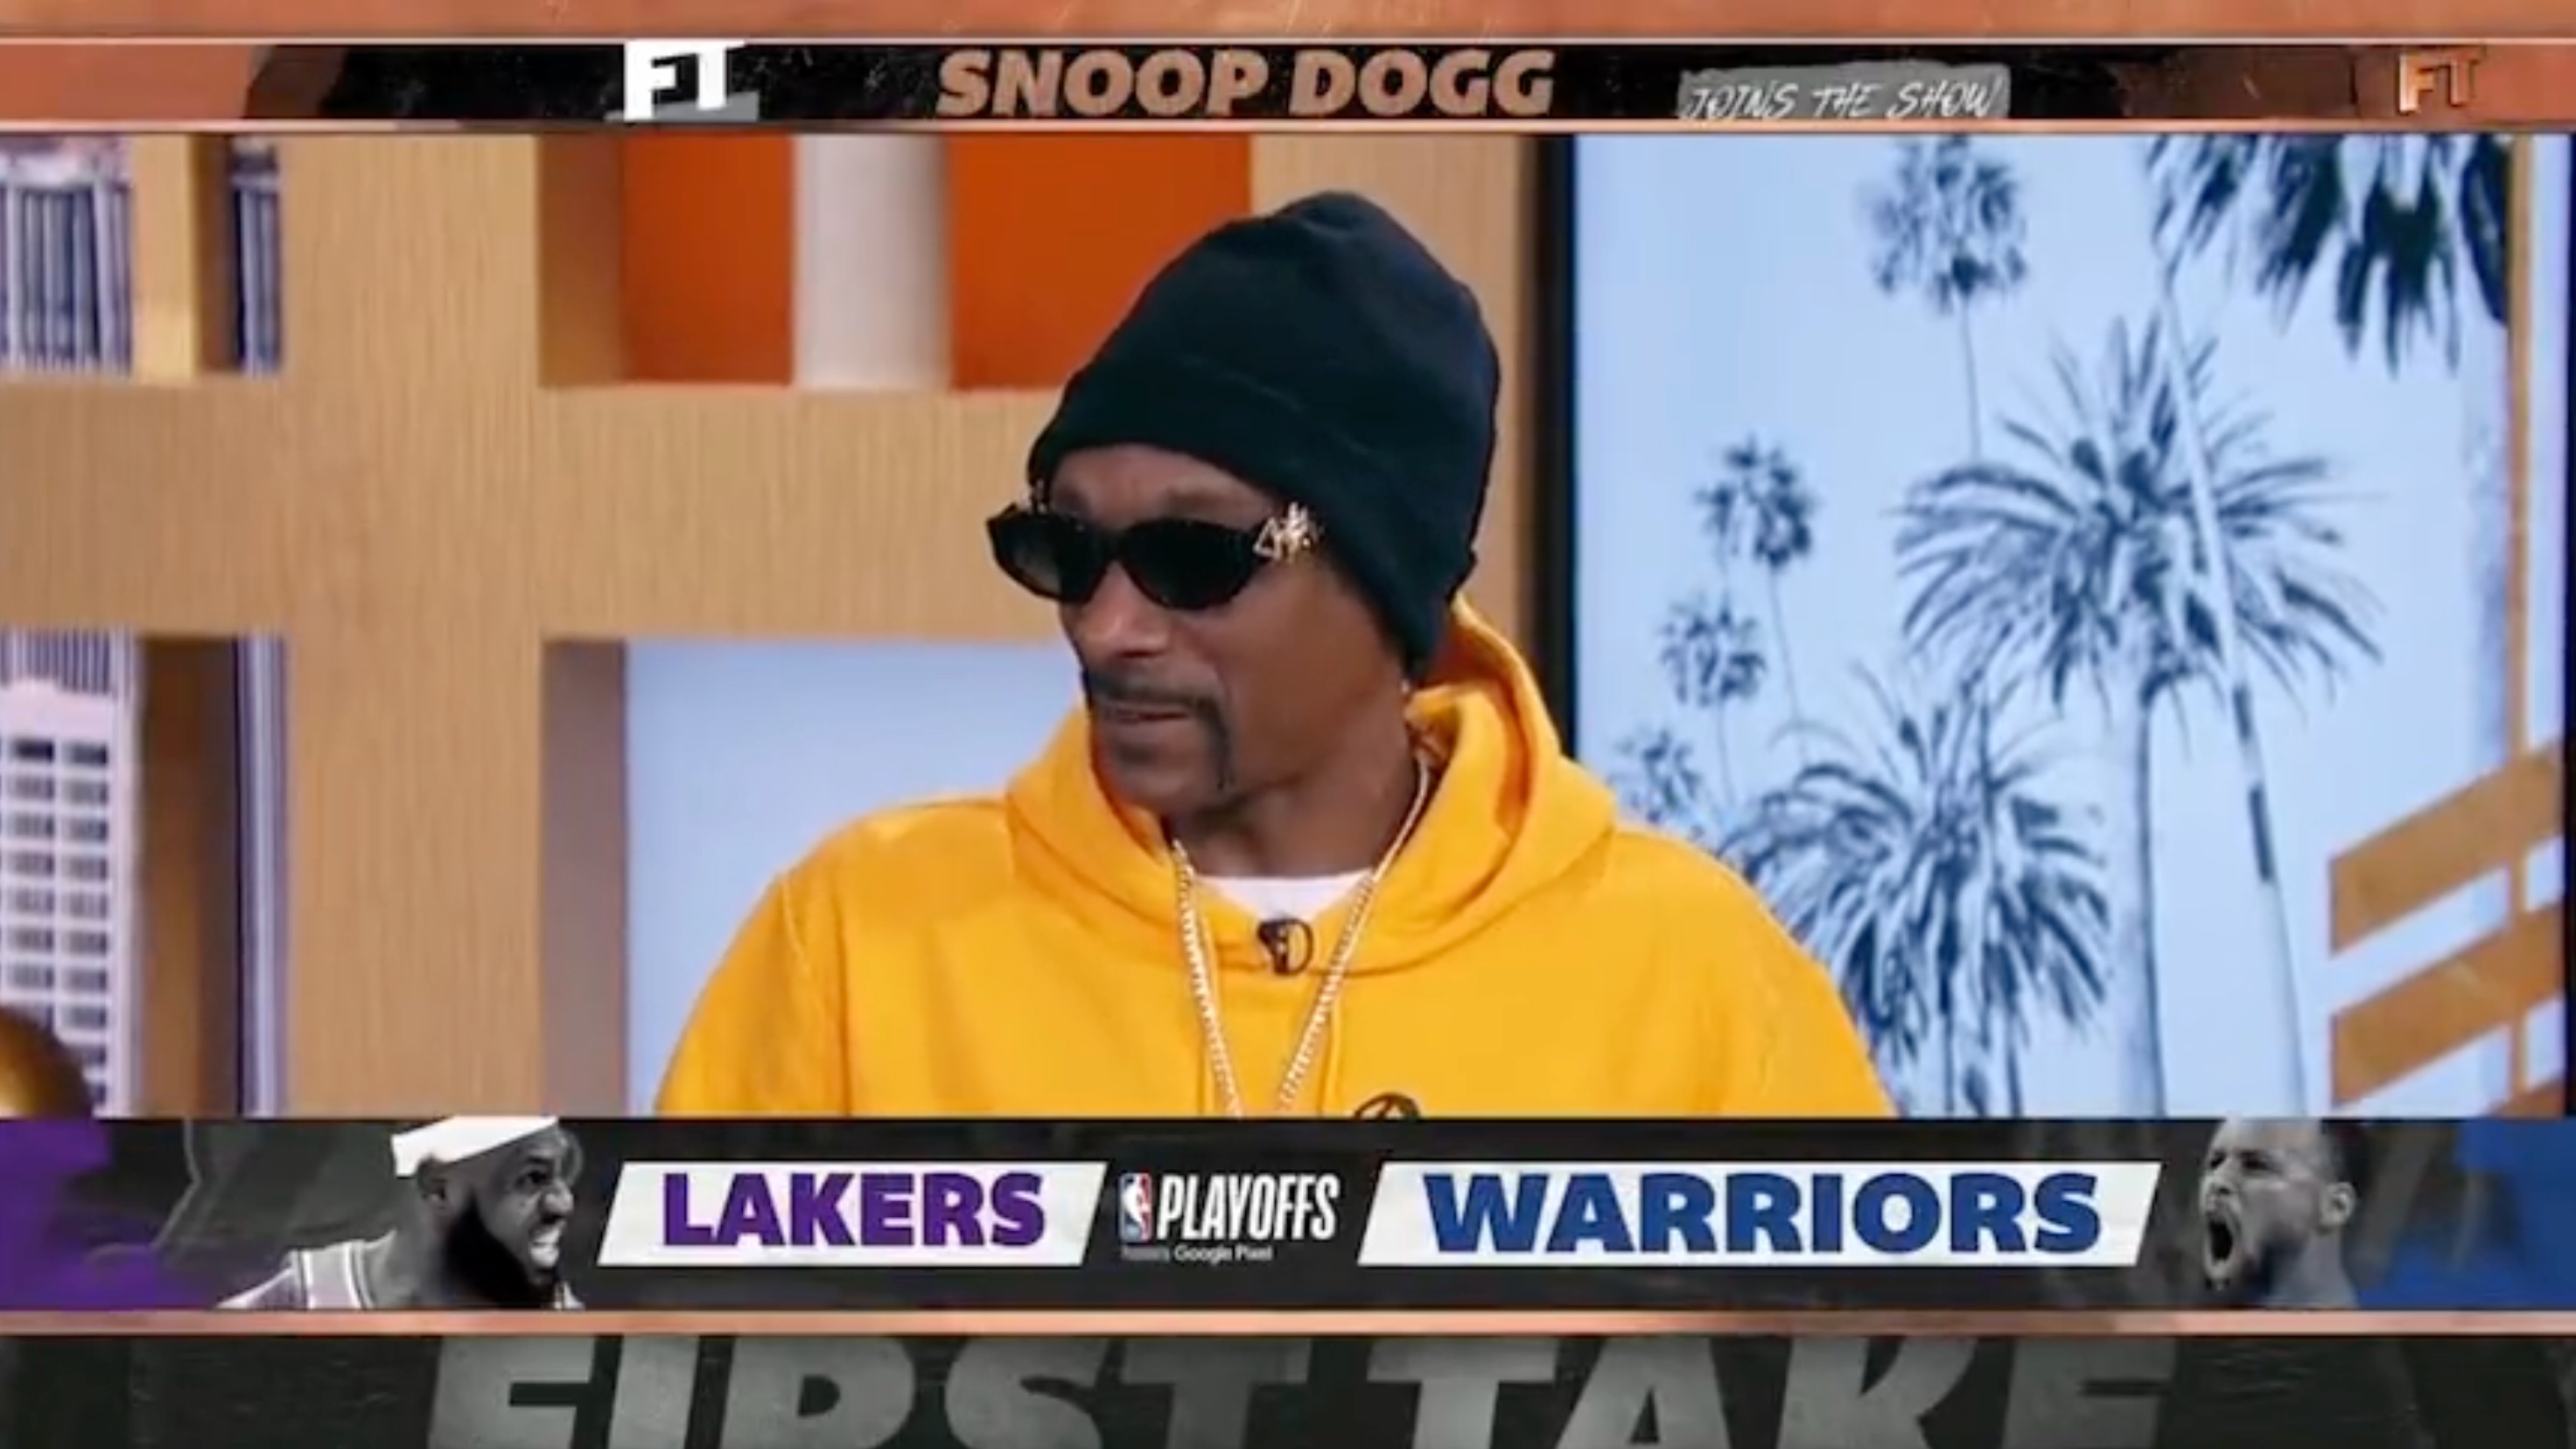 Snoop Dogg discusses Lakers series